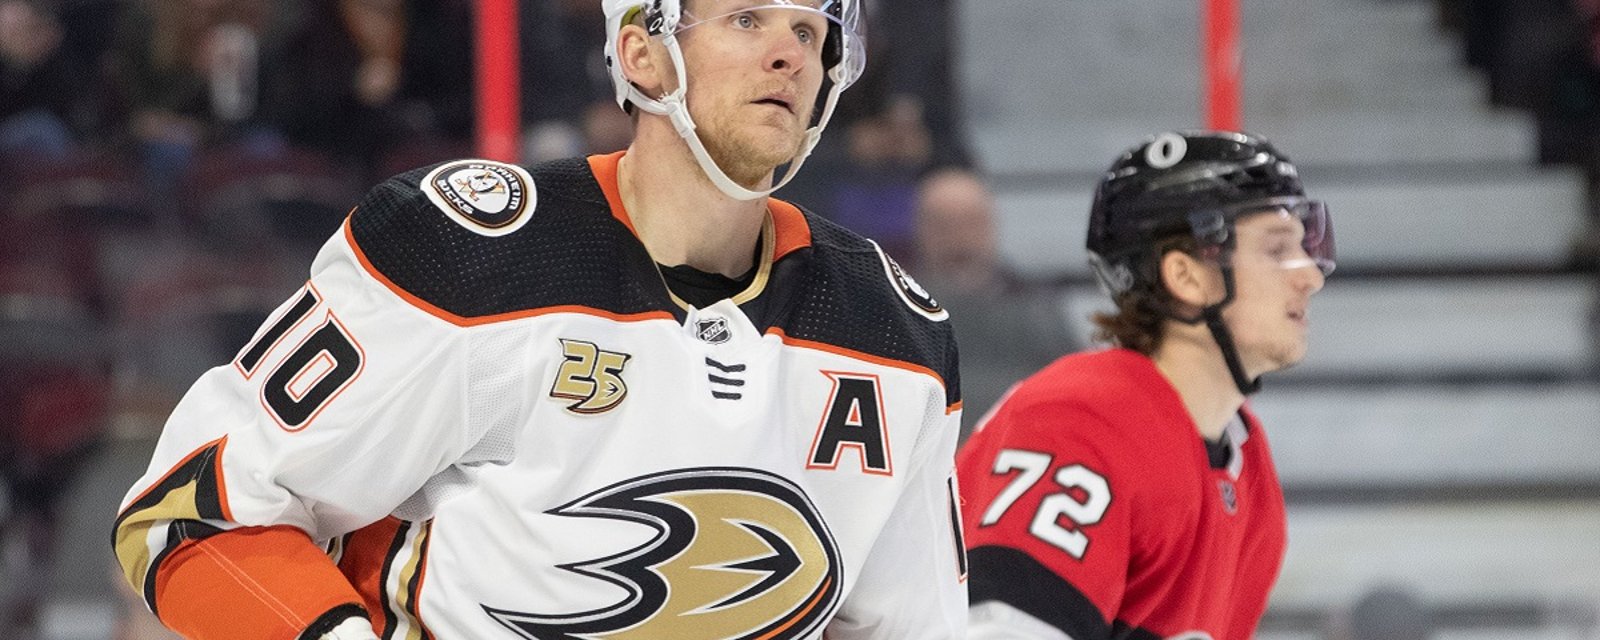 Rumor: Corey Perry being linked to a Canadian NHL team.